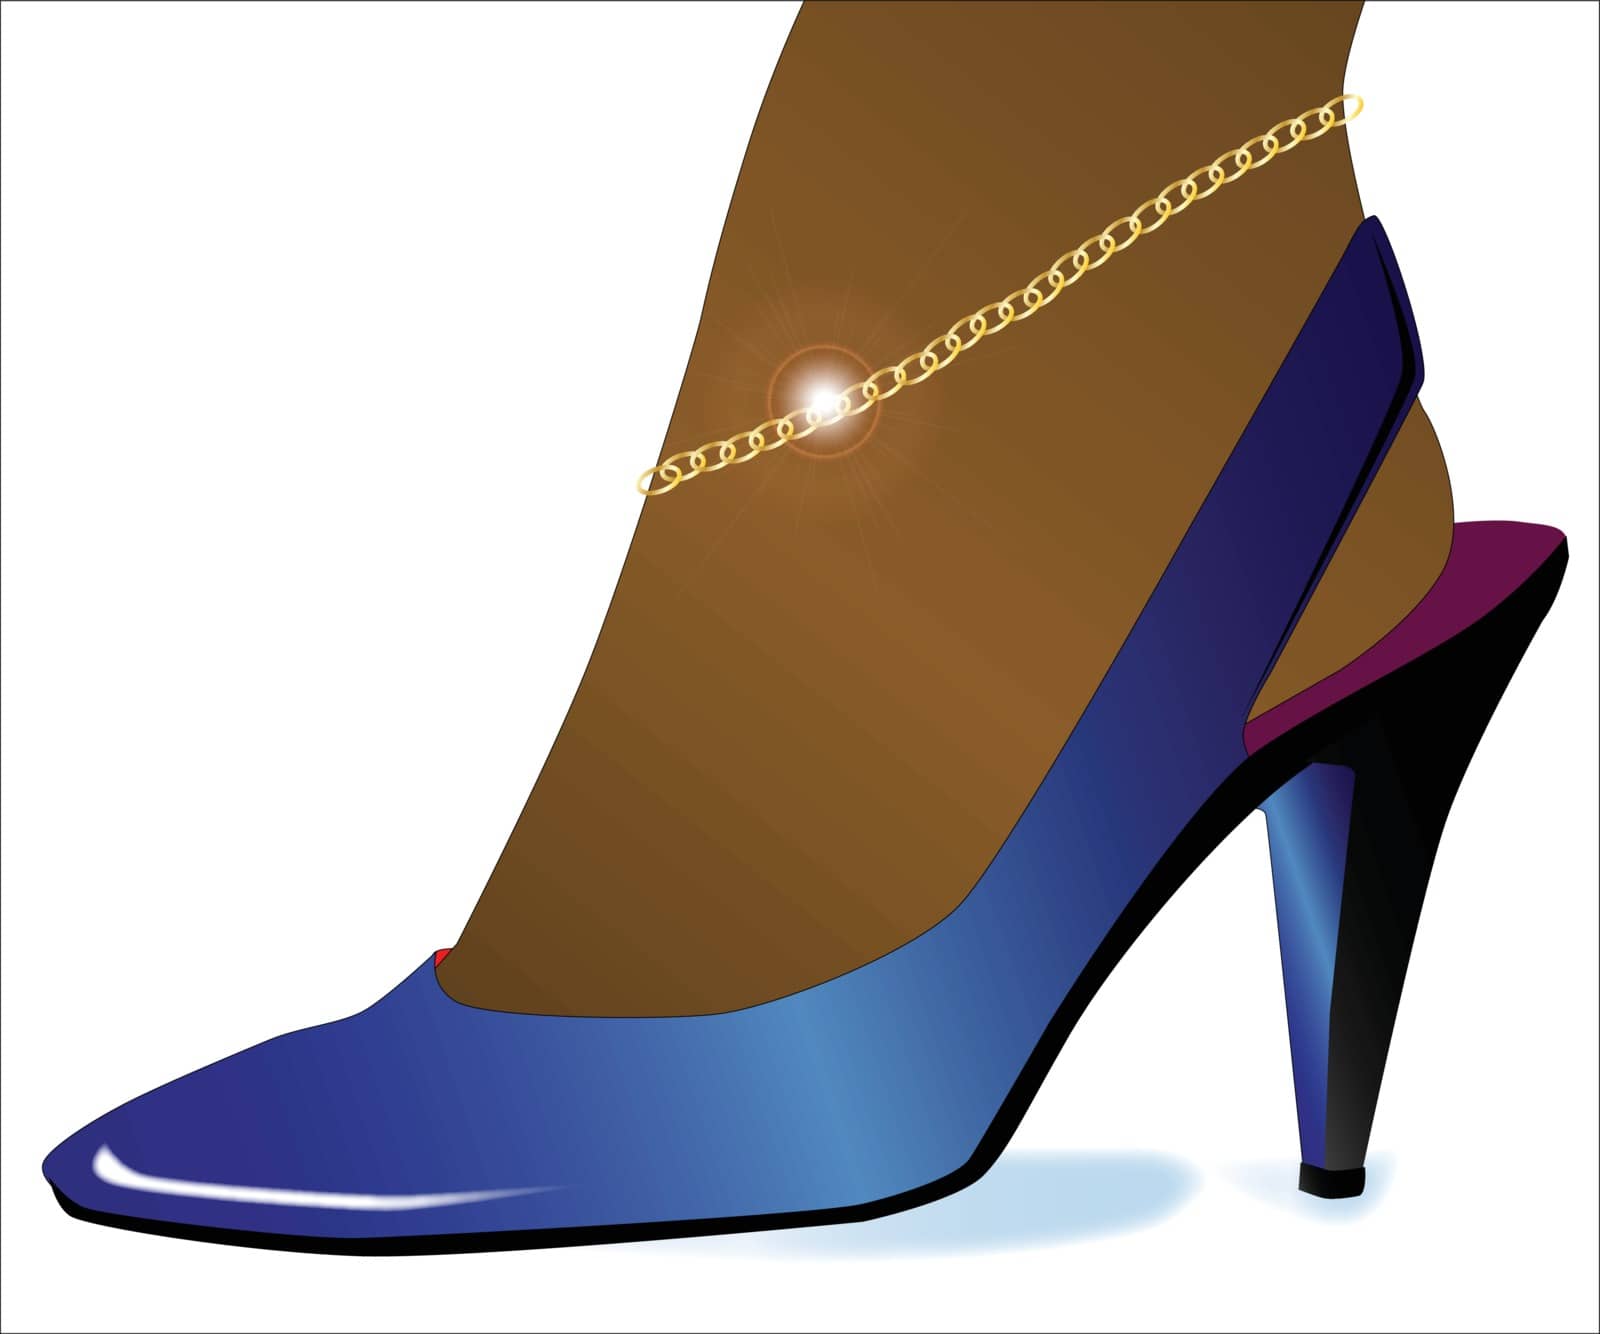 A ladies blue high heel shoe with an ankle bracelet in gold